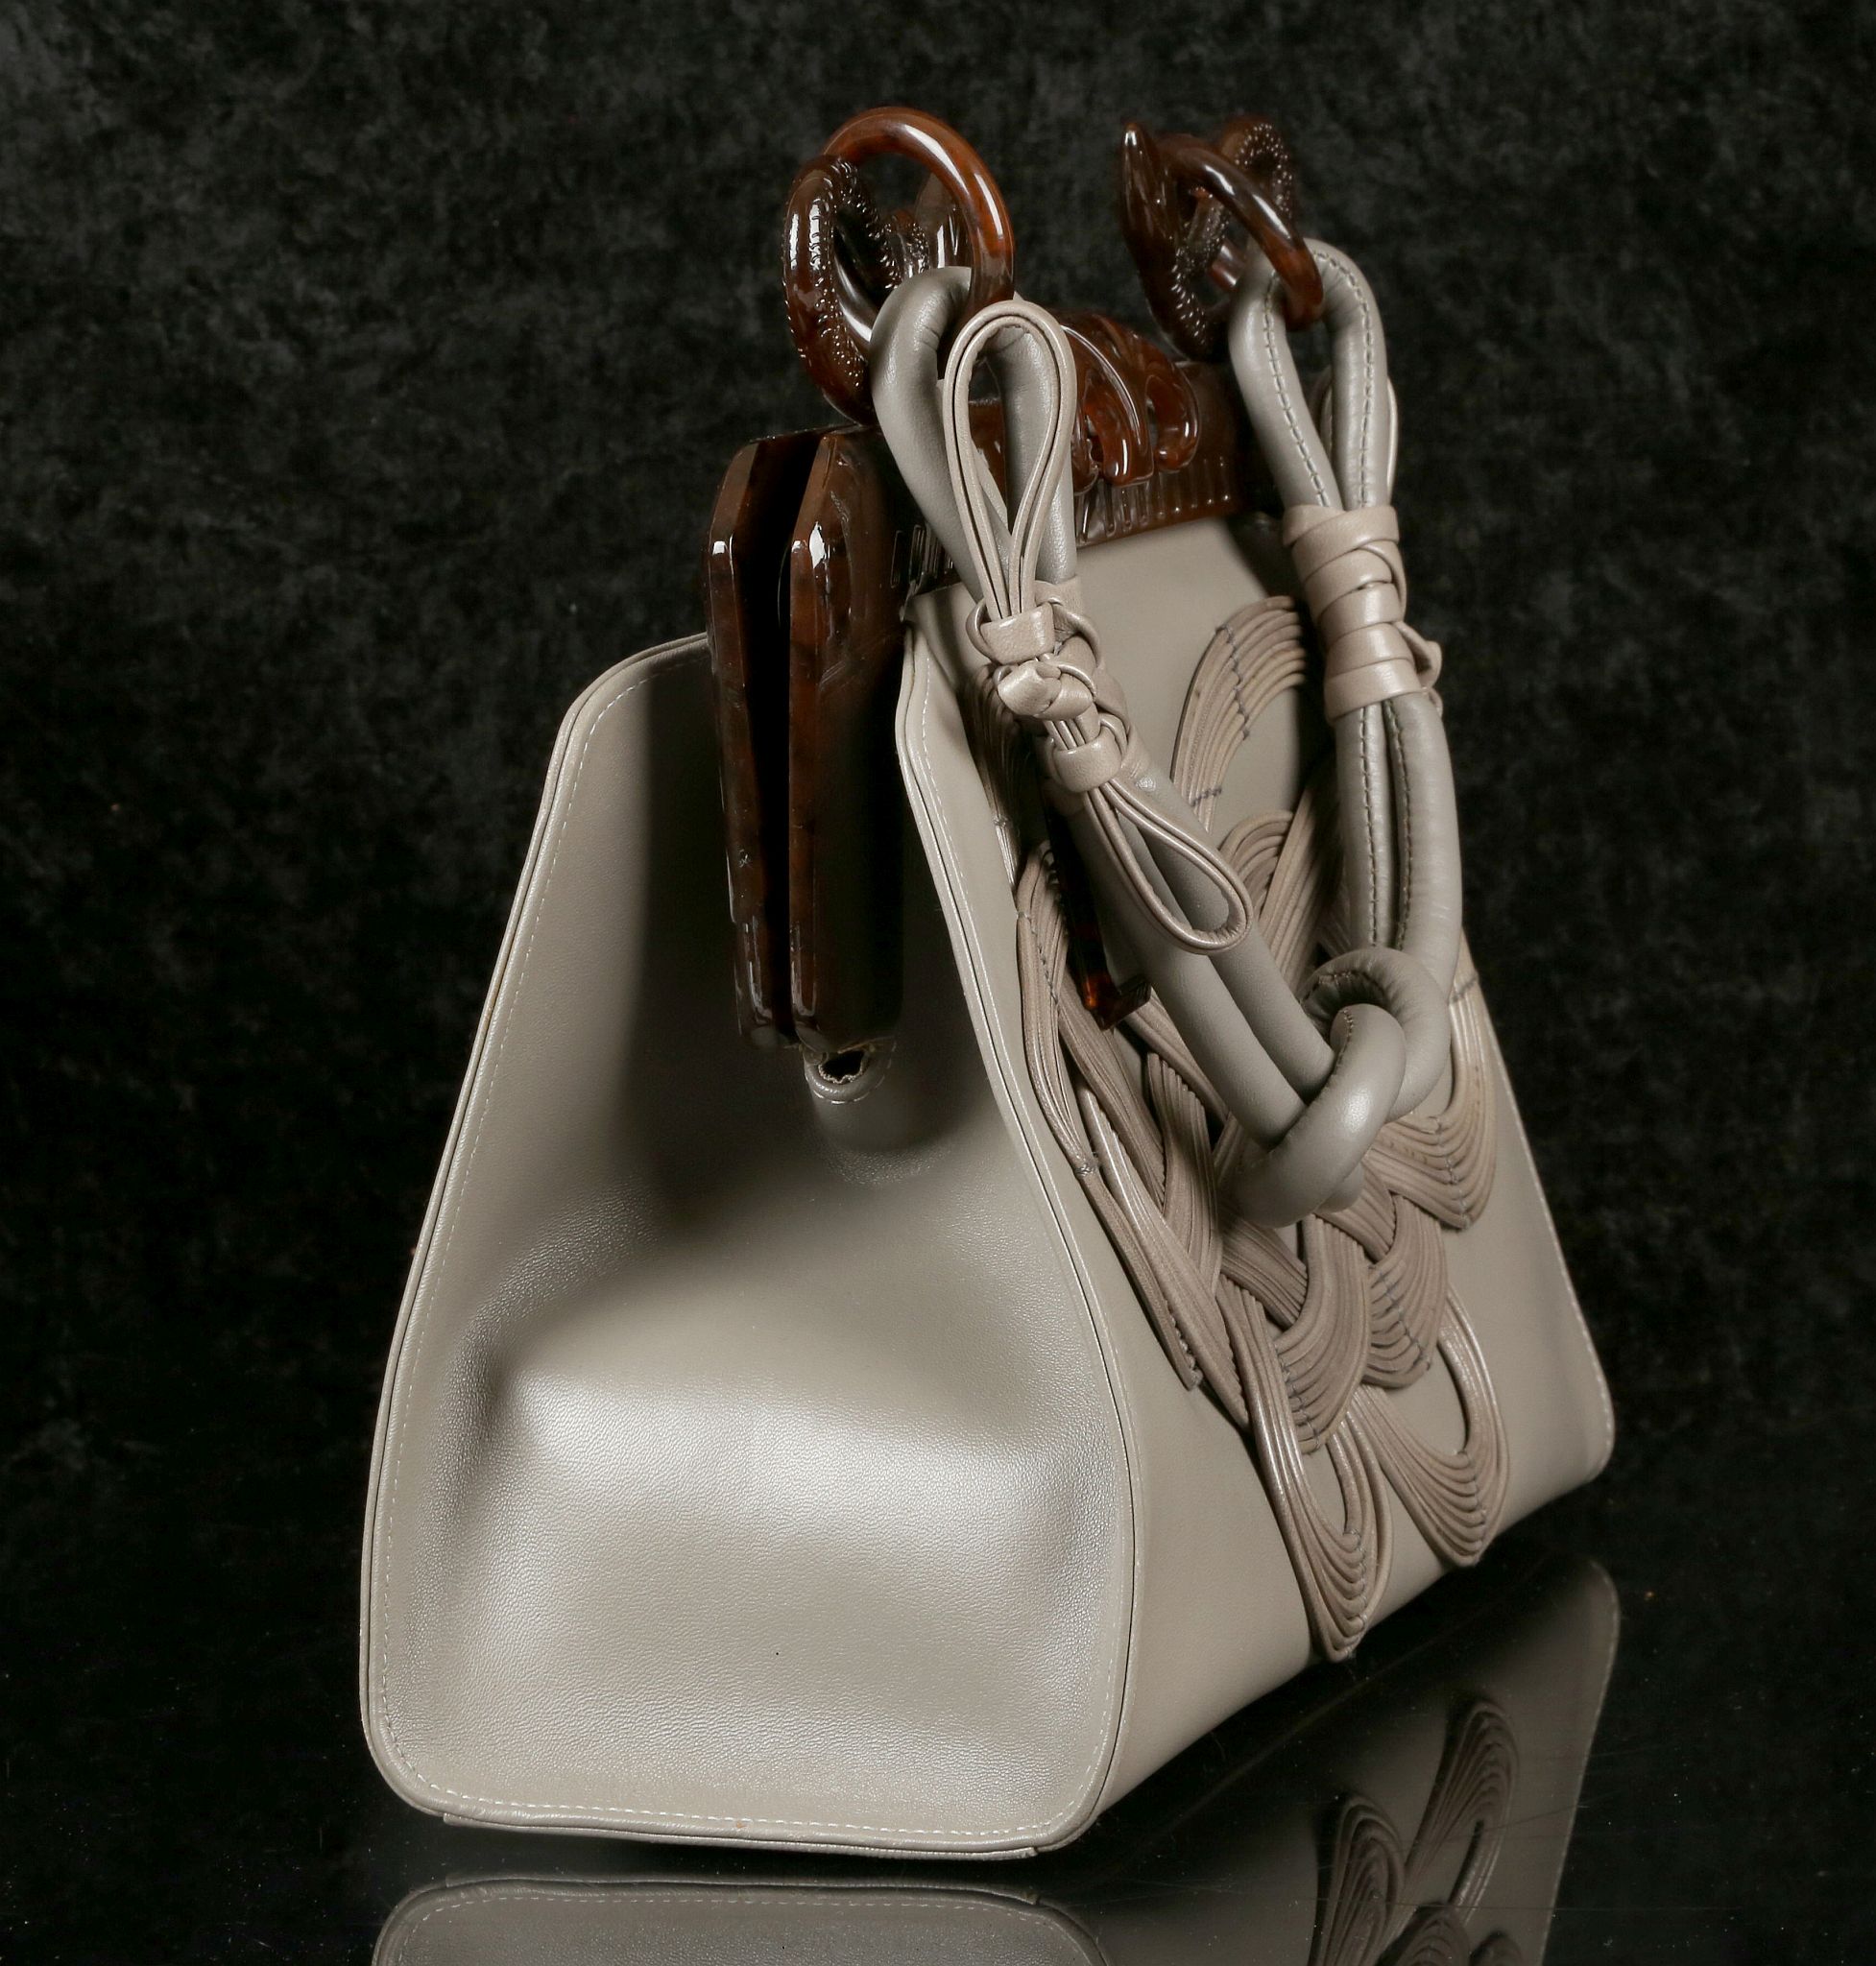 CHRISTIAN DIOR 1947 KNOT SAMOURAI HANDBAG, limited edition and numbered 0531, grey lambskin with - Image 5 of 14